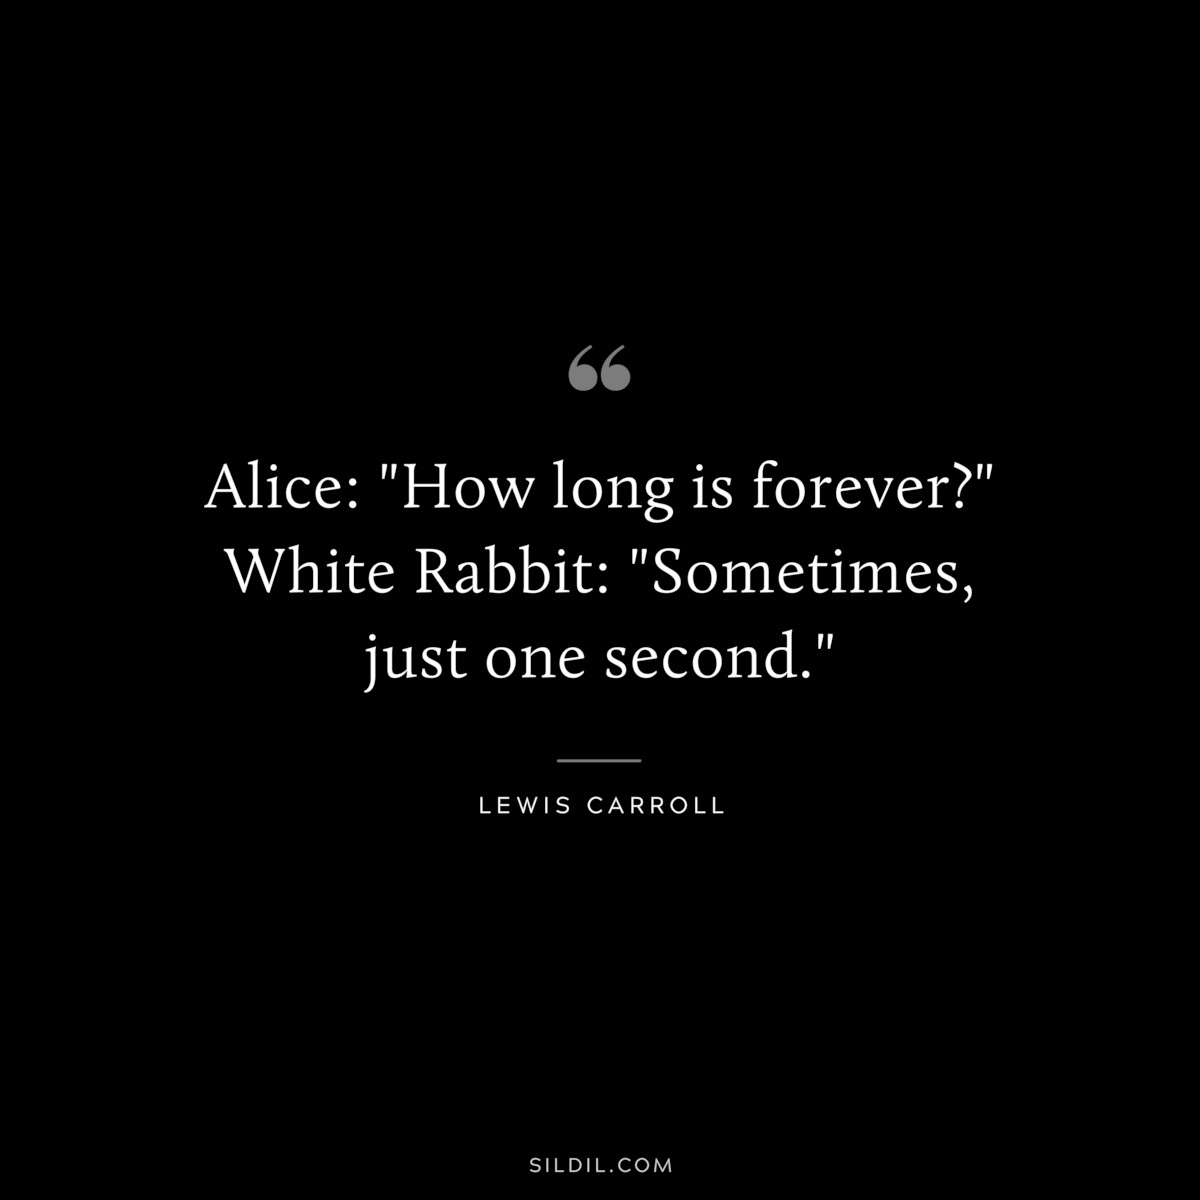 Alice: "How long is forever?" White Rabbit: "Sometimes, just one second."